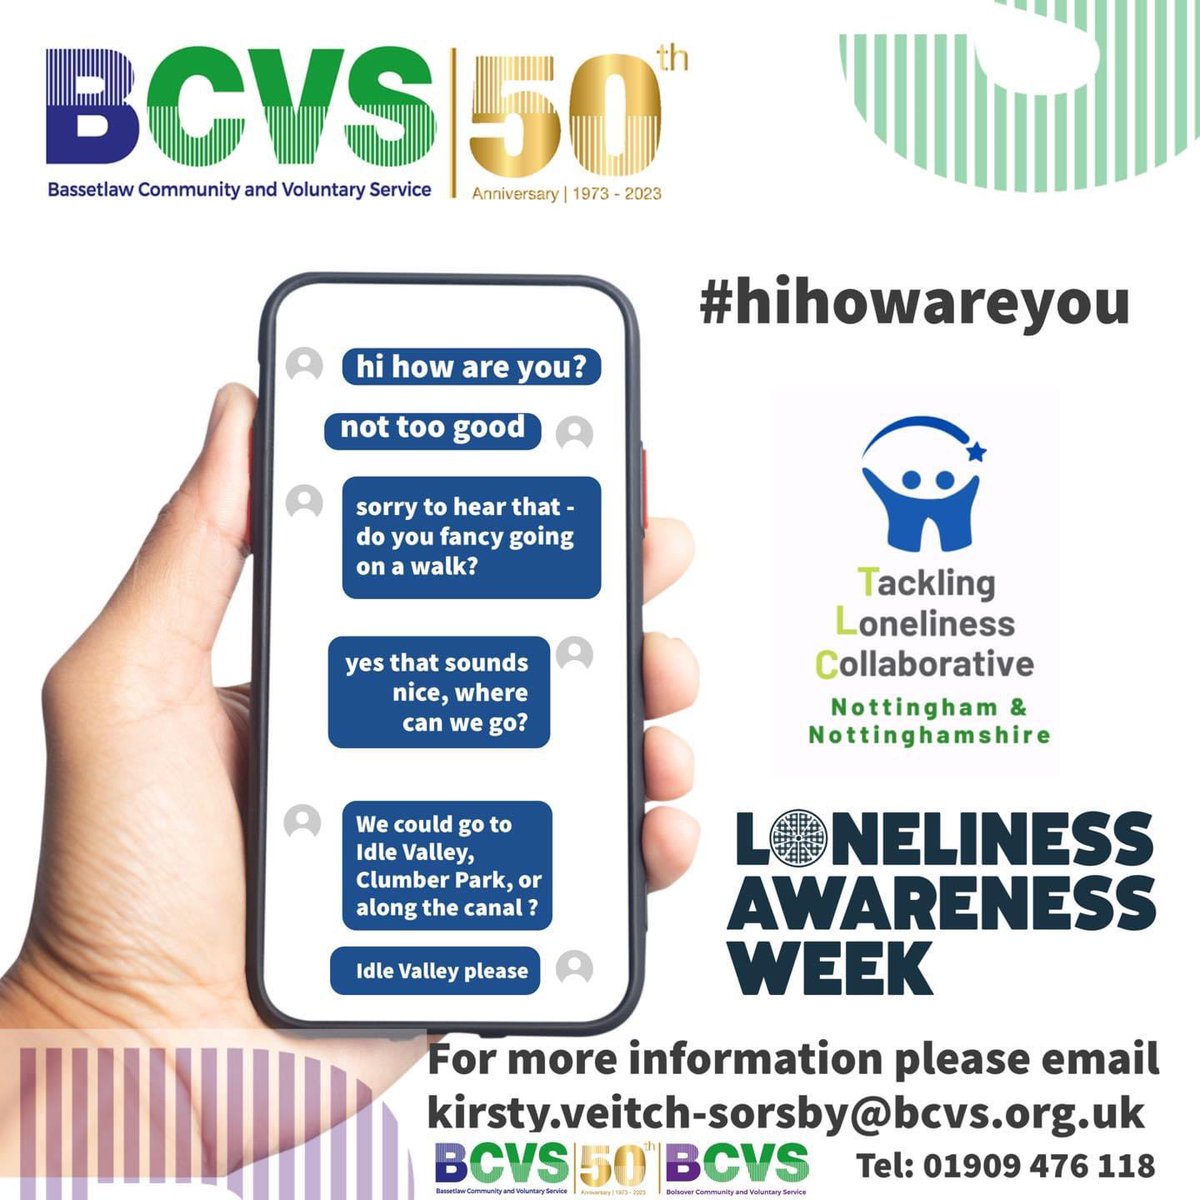 Day #3 for our #lonelinessawarenessweek campaign to encourage more people to start a conversation with #hihowareyou to see where it leads.

This one is suggesting going on a local walk.

There are lots of #walking options in #Bassetlaw.